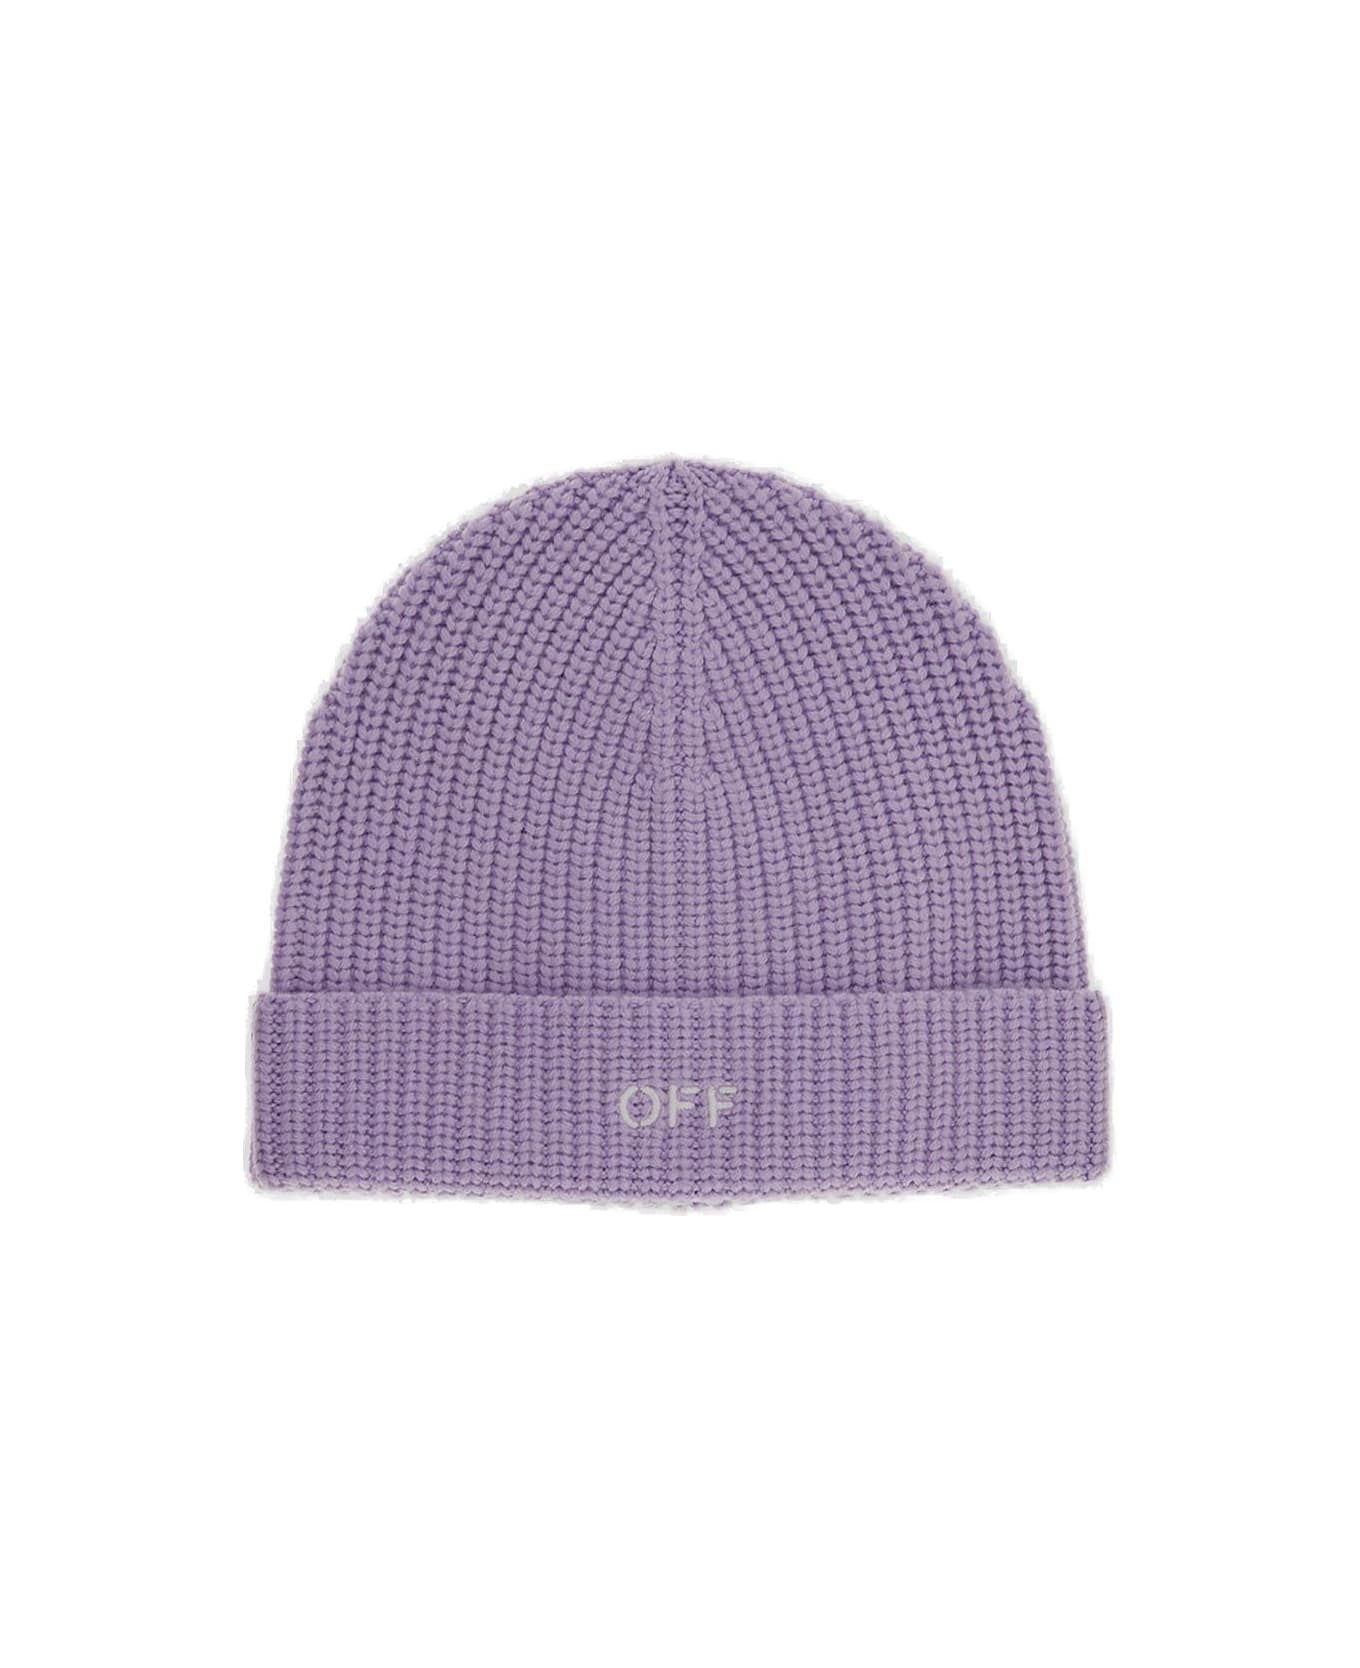 Off-White Off-stamp Logo Embroidered Beanie - LILAC WHITE 帽子